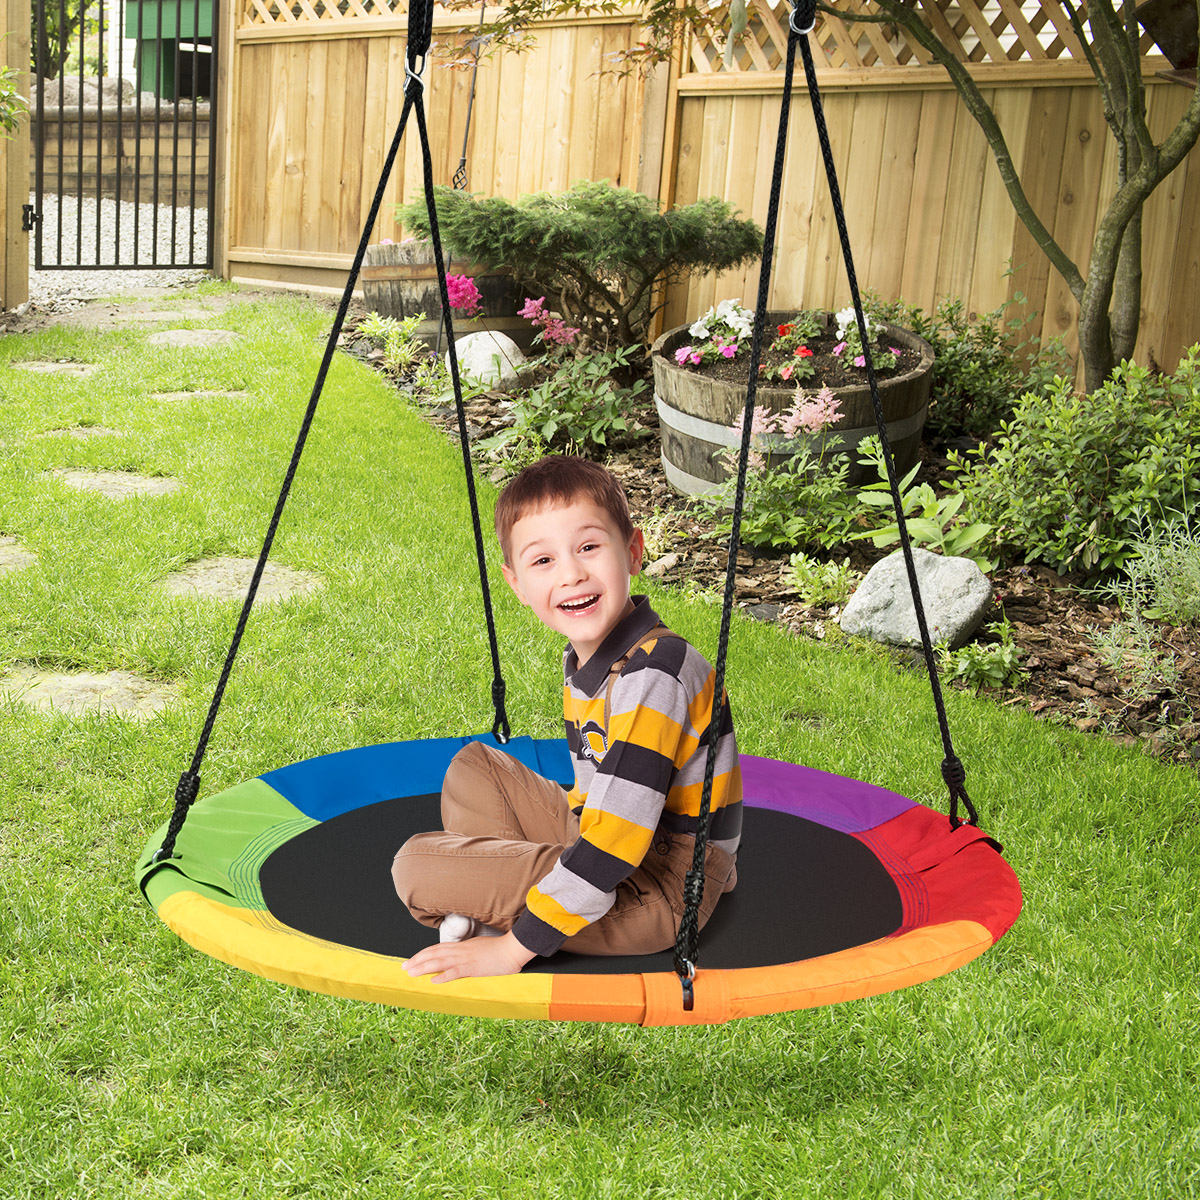 Goplus 40" Flying Saucer Tree Swing Indoor Outdoor Play Set Swing for Kids colorful - image 3 of 10